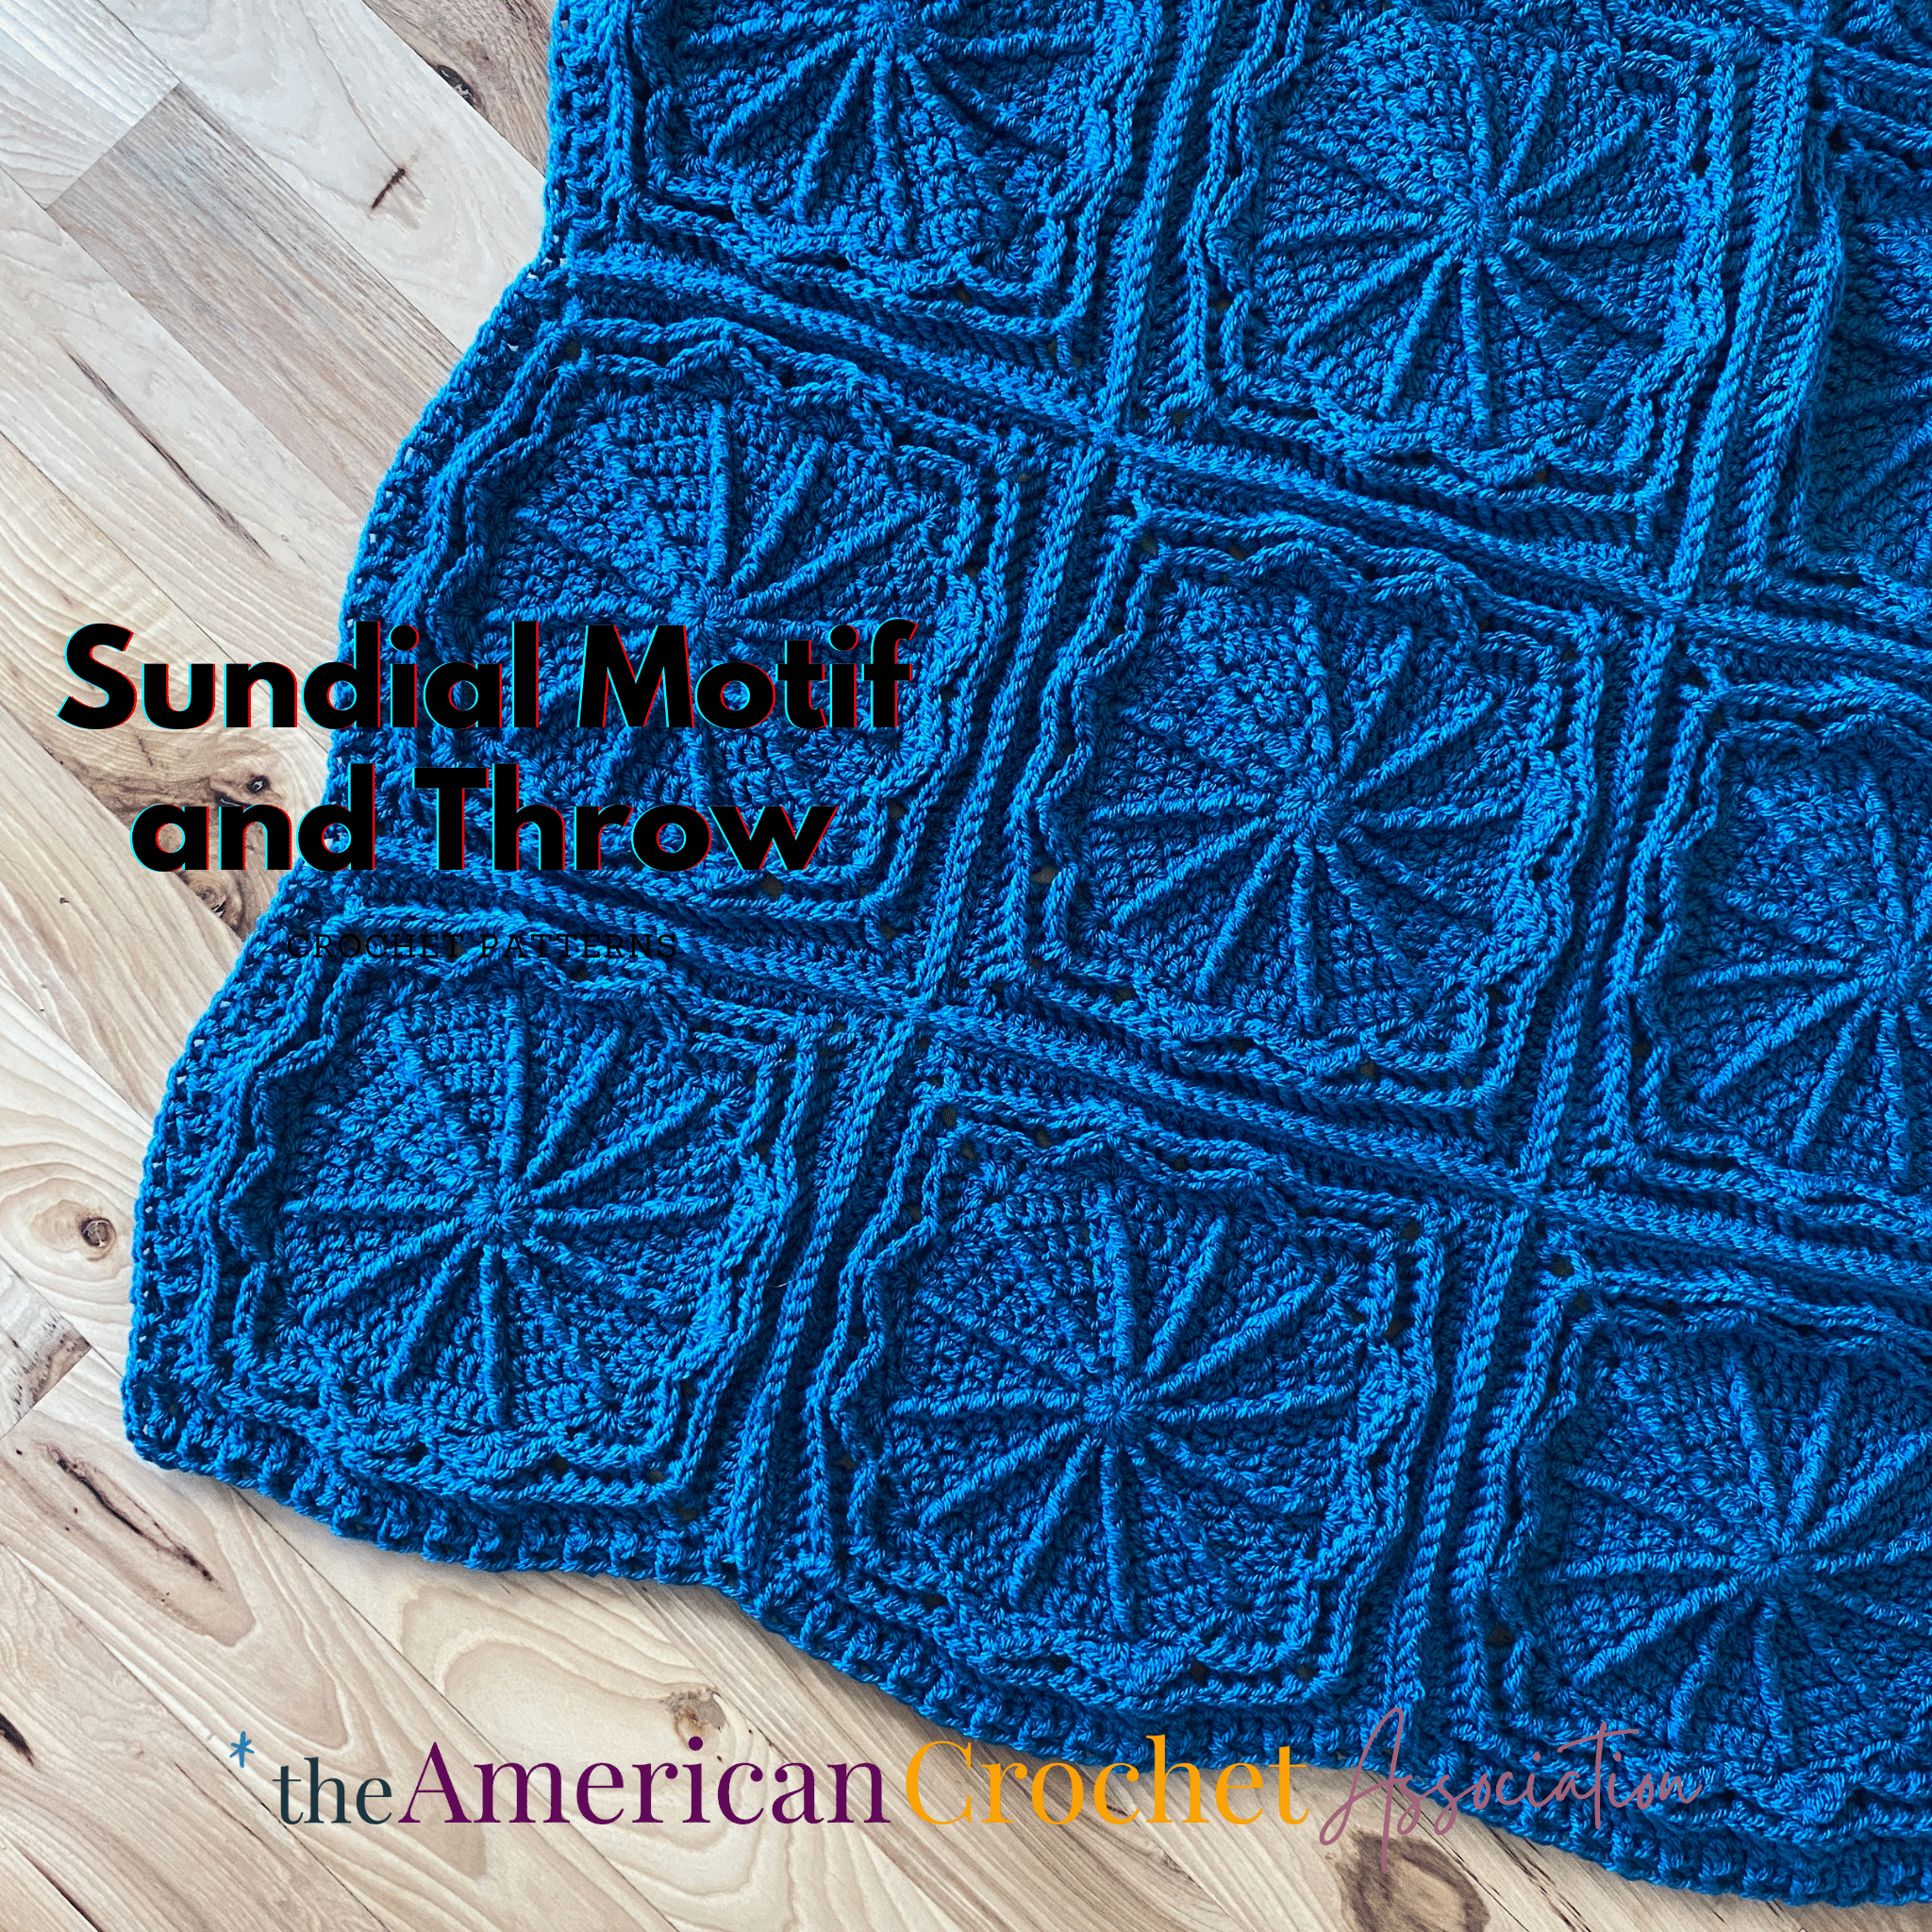 Crochet Blanket Sizes: Tips, stitches, patterns, and a cheat sheet